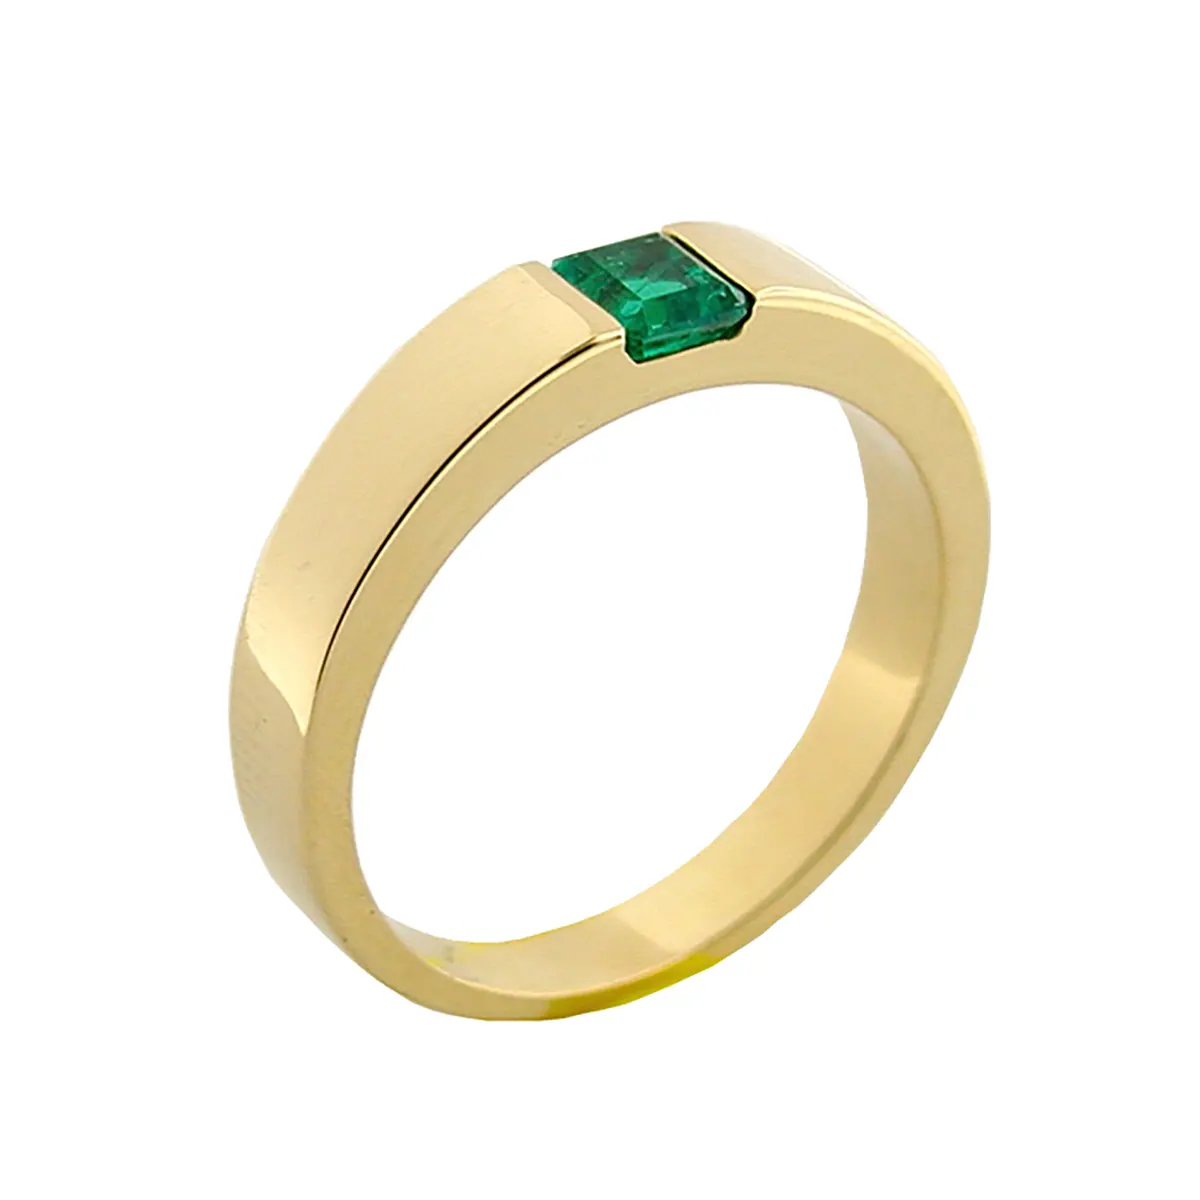 Solitaire Wedding Band With Square Natural Emerald in 18K Gold